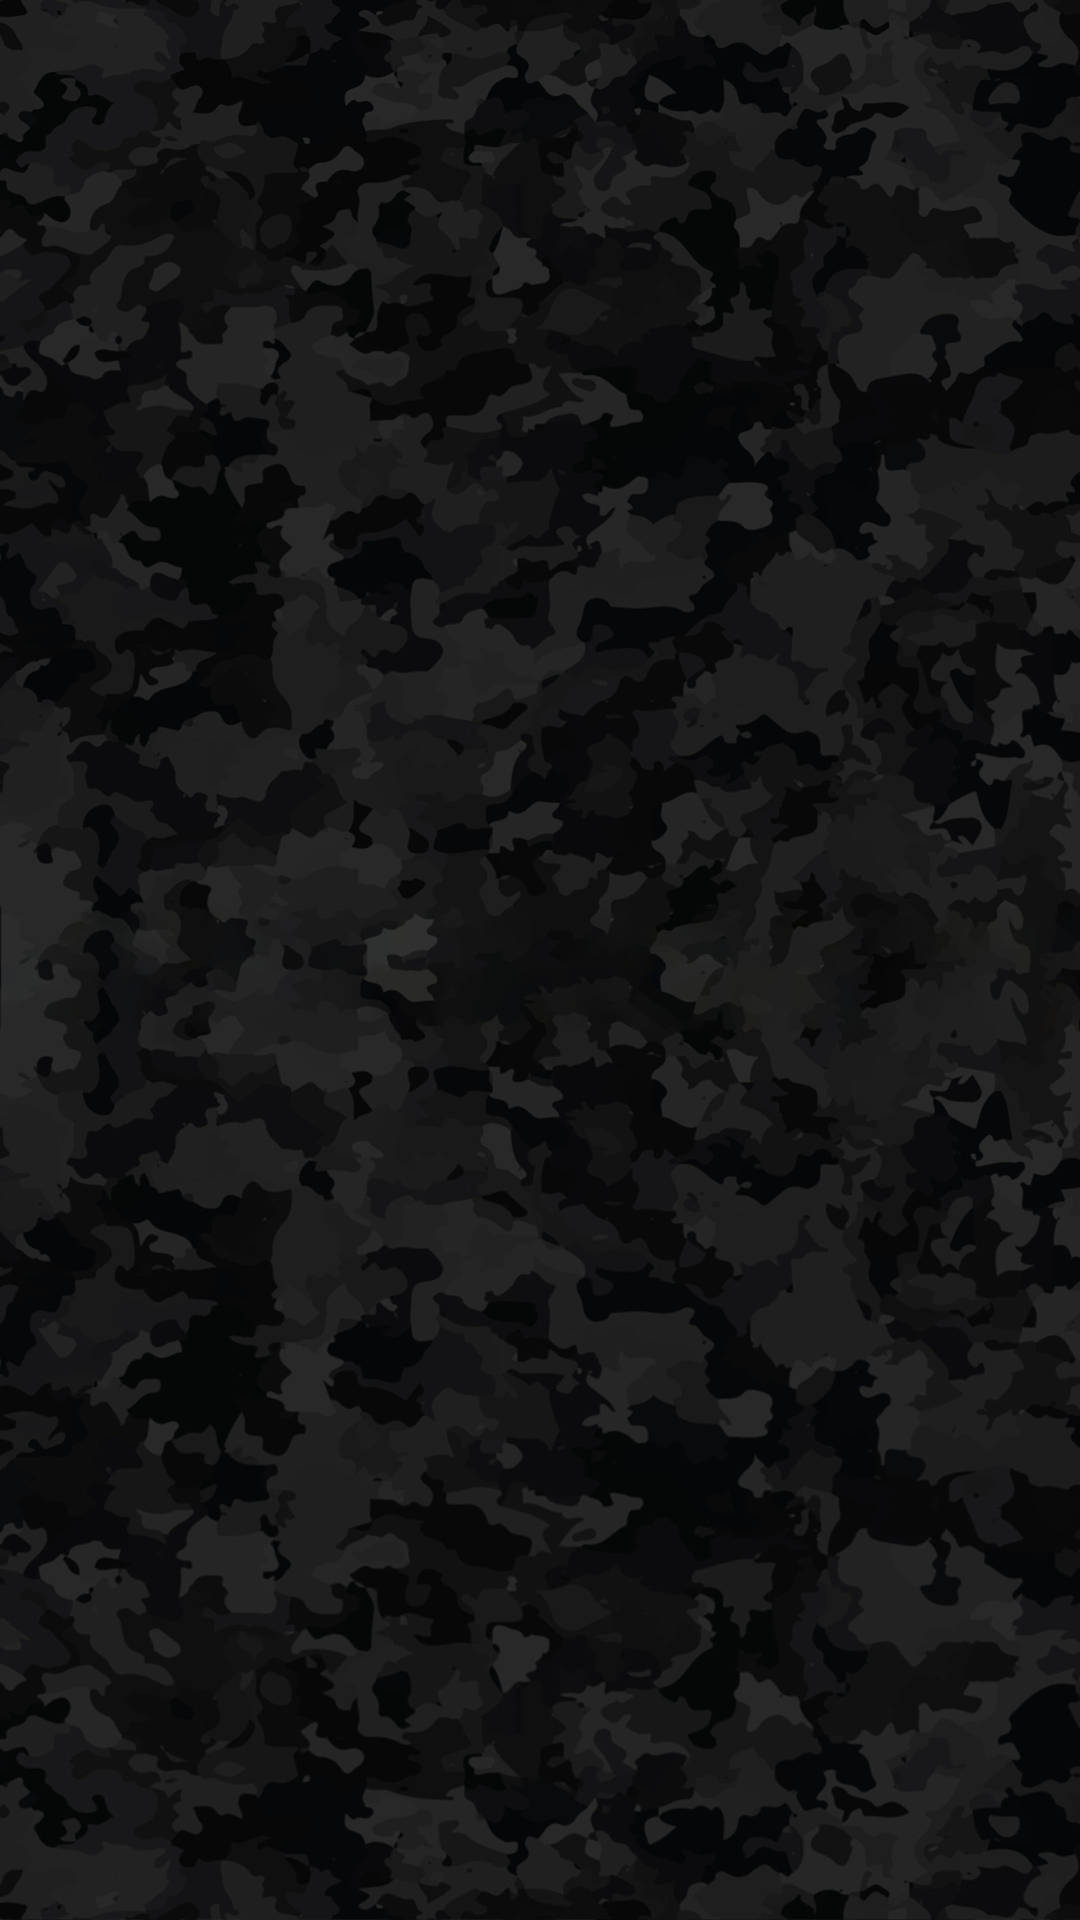 Camouflage Black And Grey Iphone Background